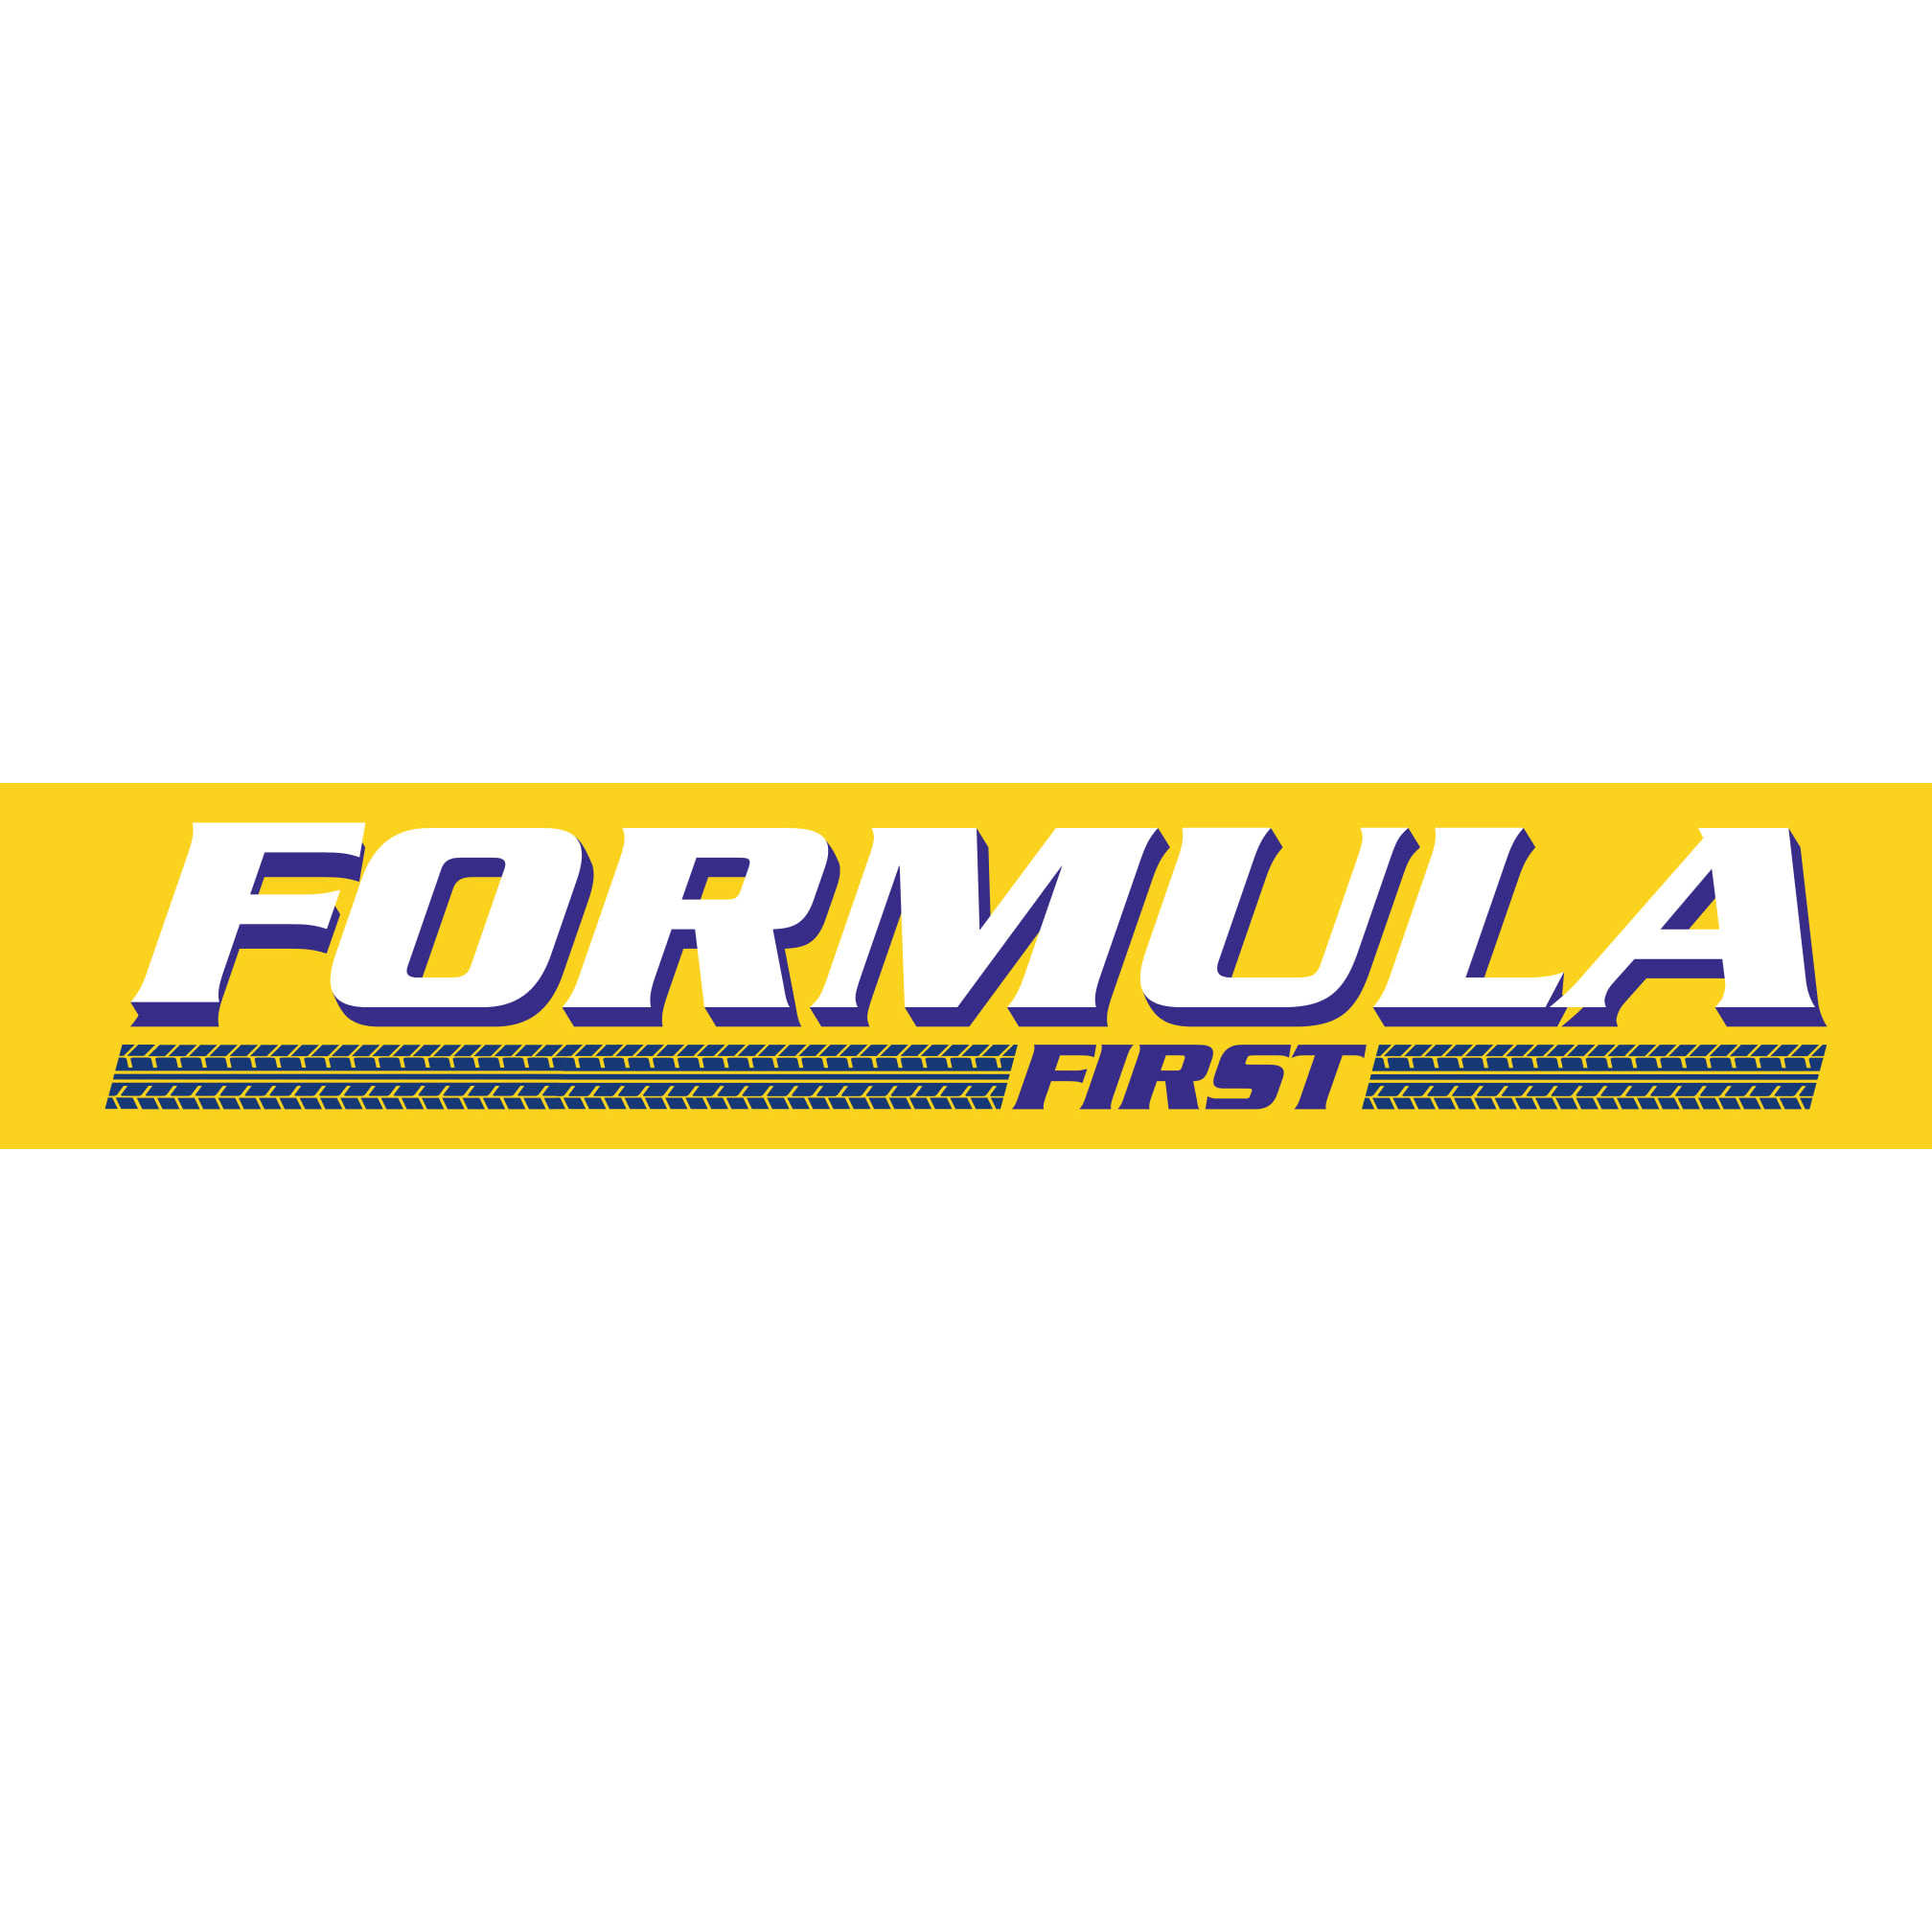 Formula First Tyre Exhaust & Auto Centre Ltd - Weston-Super-Mare, Somerset BS24 9AA - 01934 644473 | ShowMeLocal.com